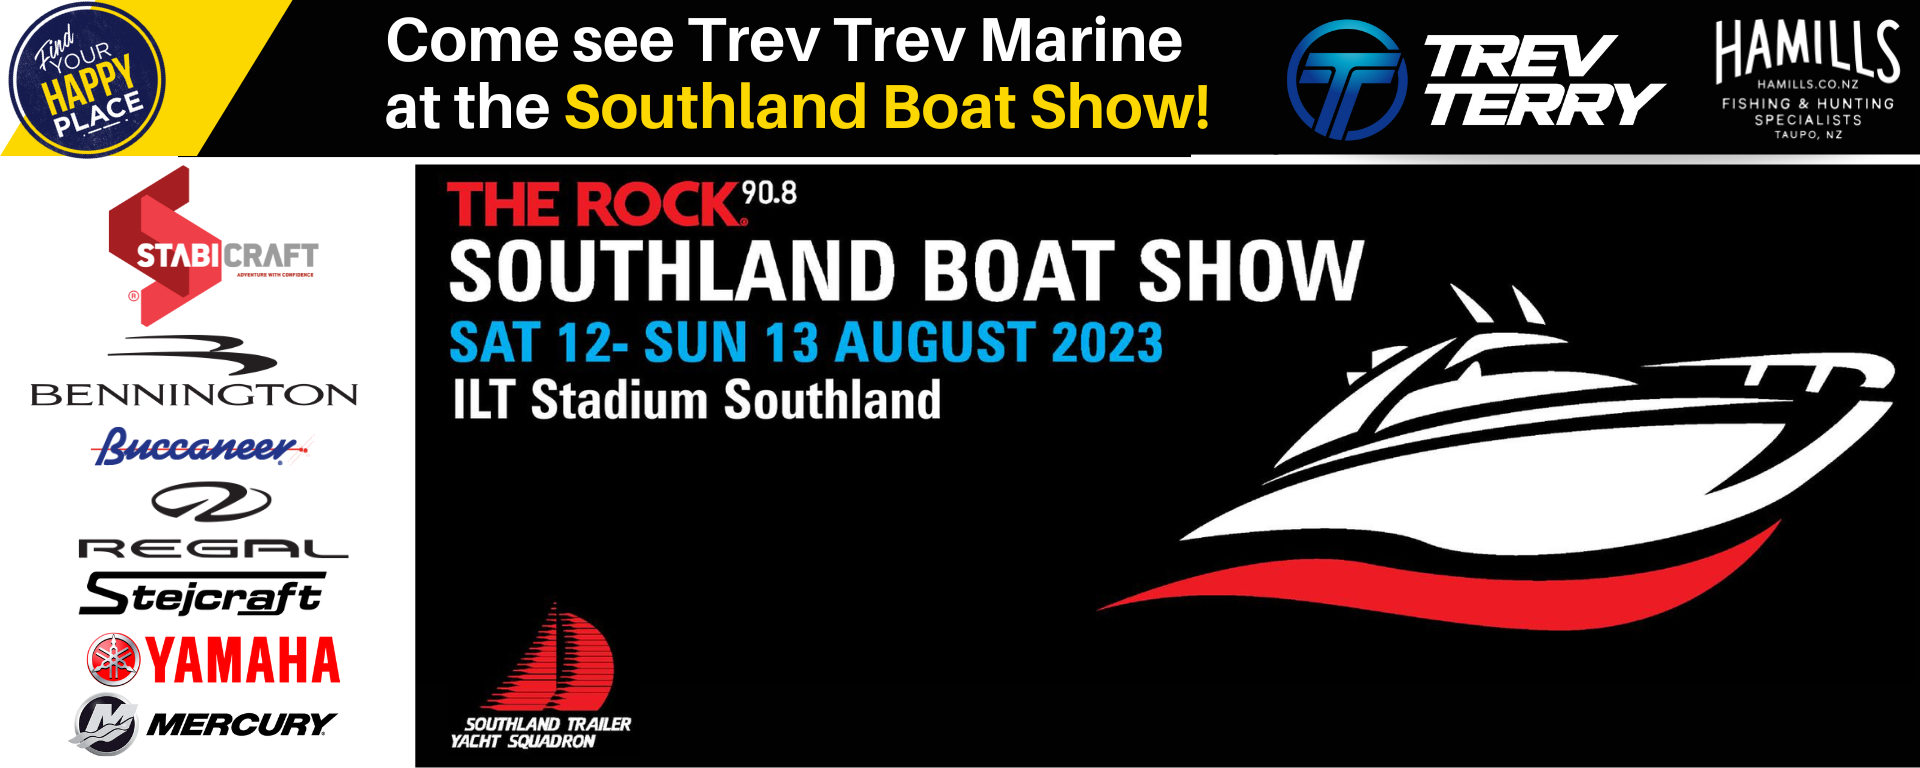 Trev Terry at Southland Boat show